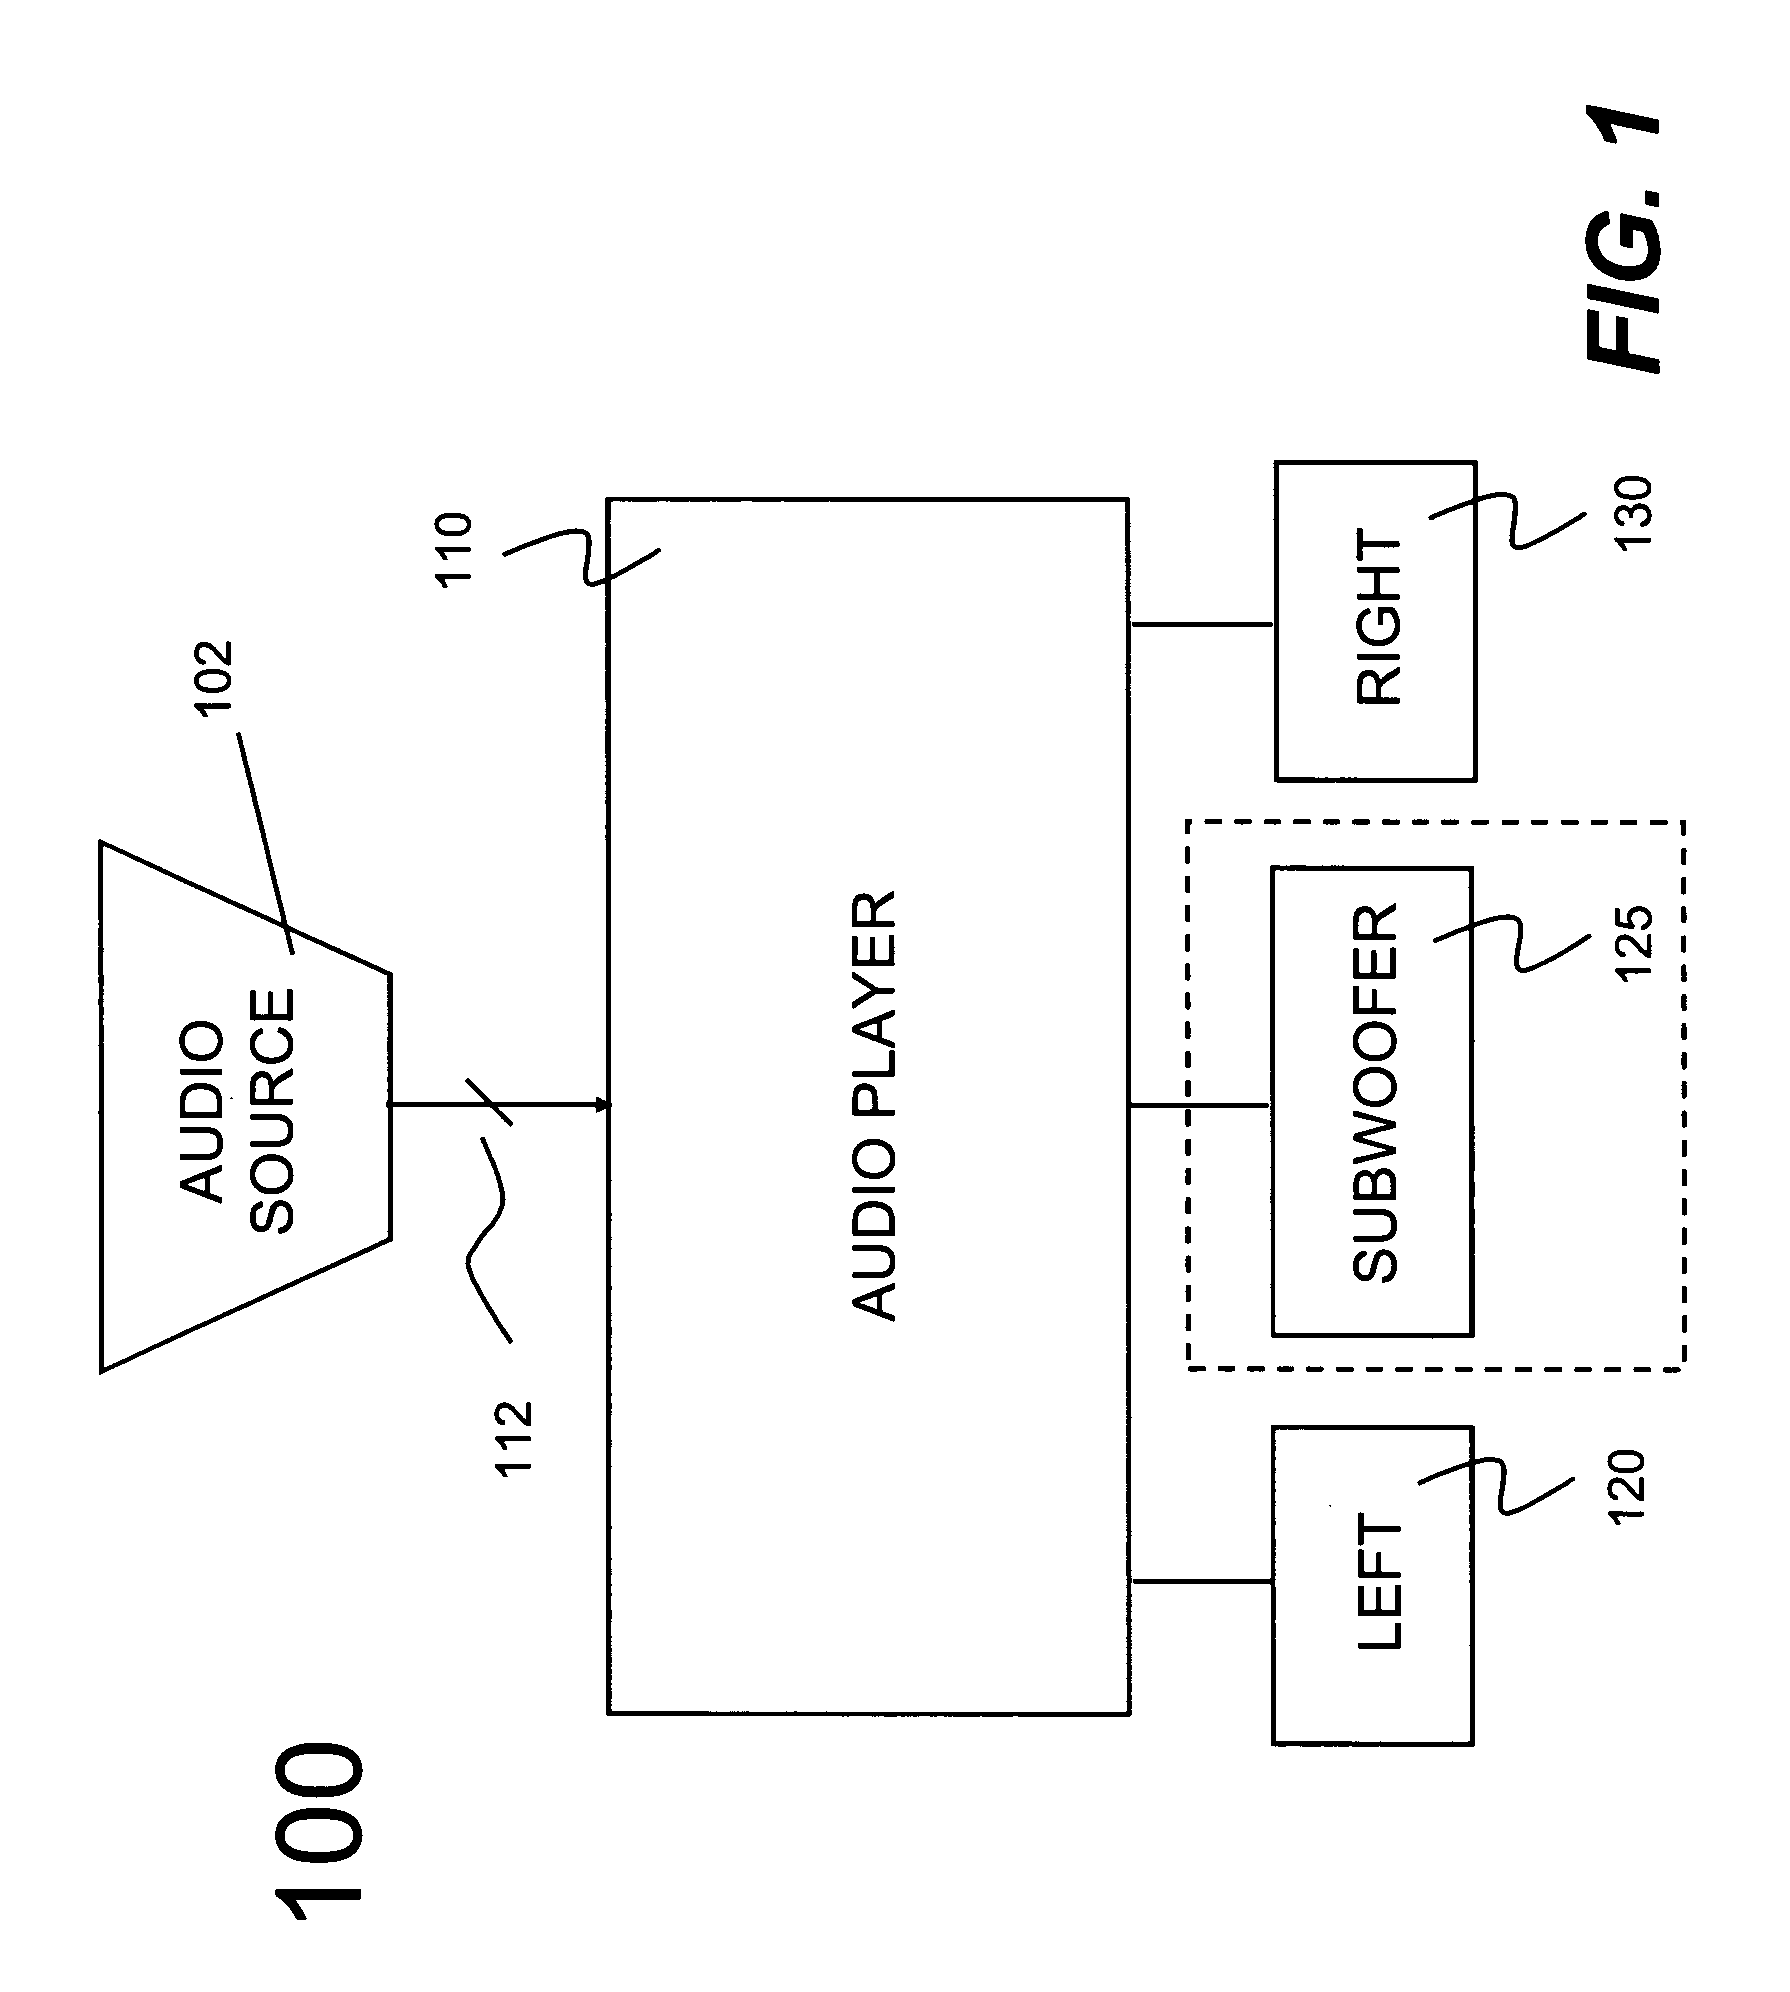 Method and apparatus for automatically enabling subwoofer channel audio based on detection of subwoofer device